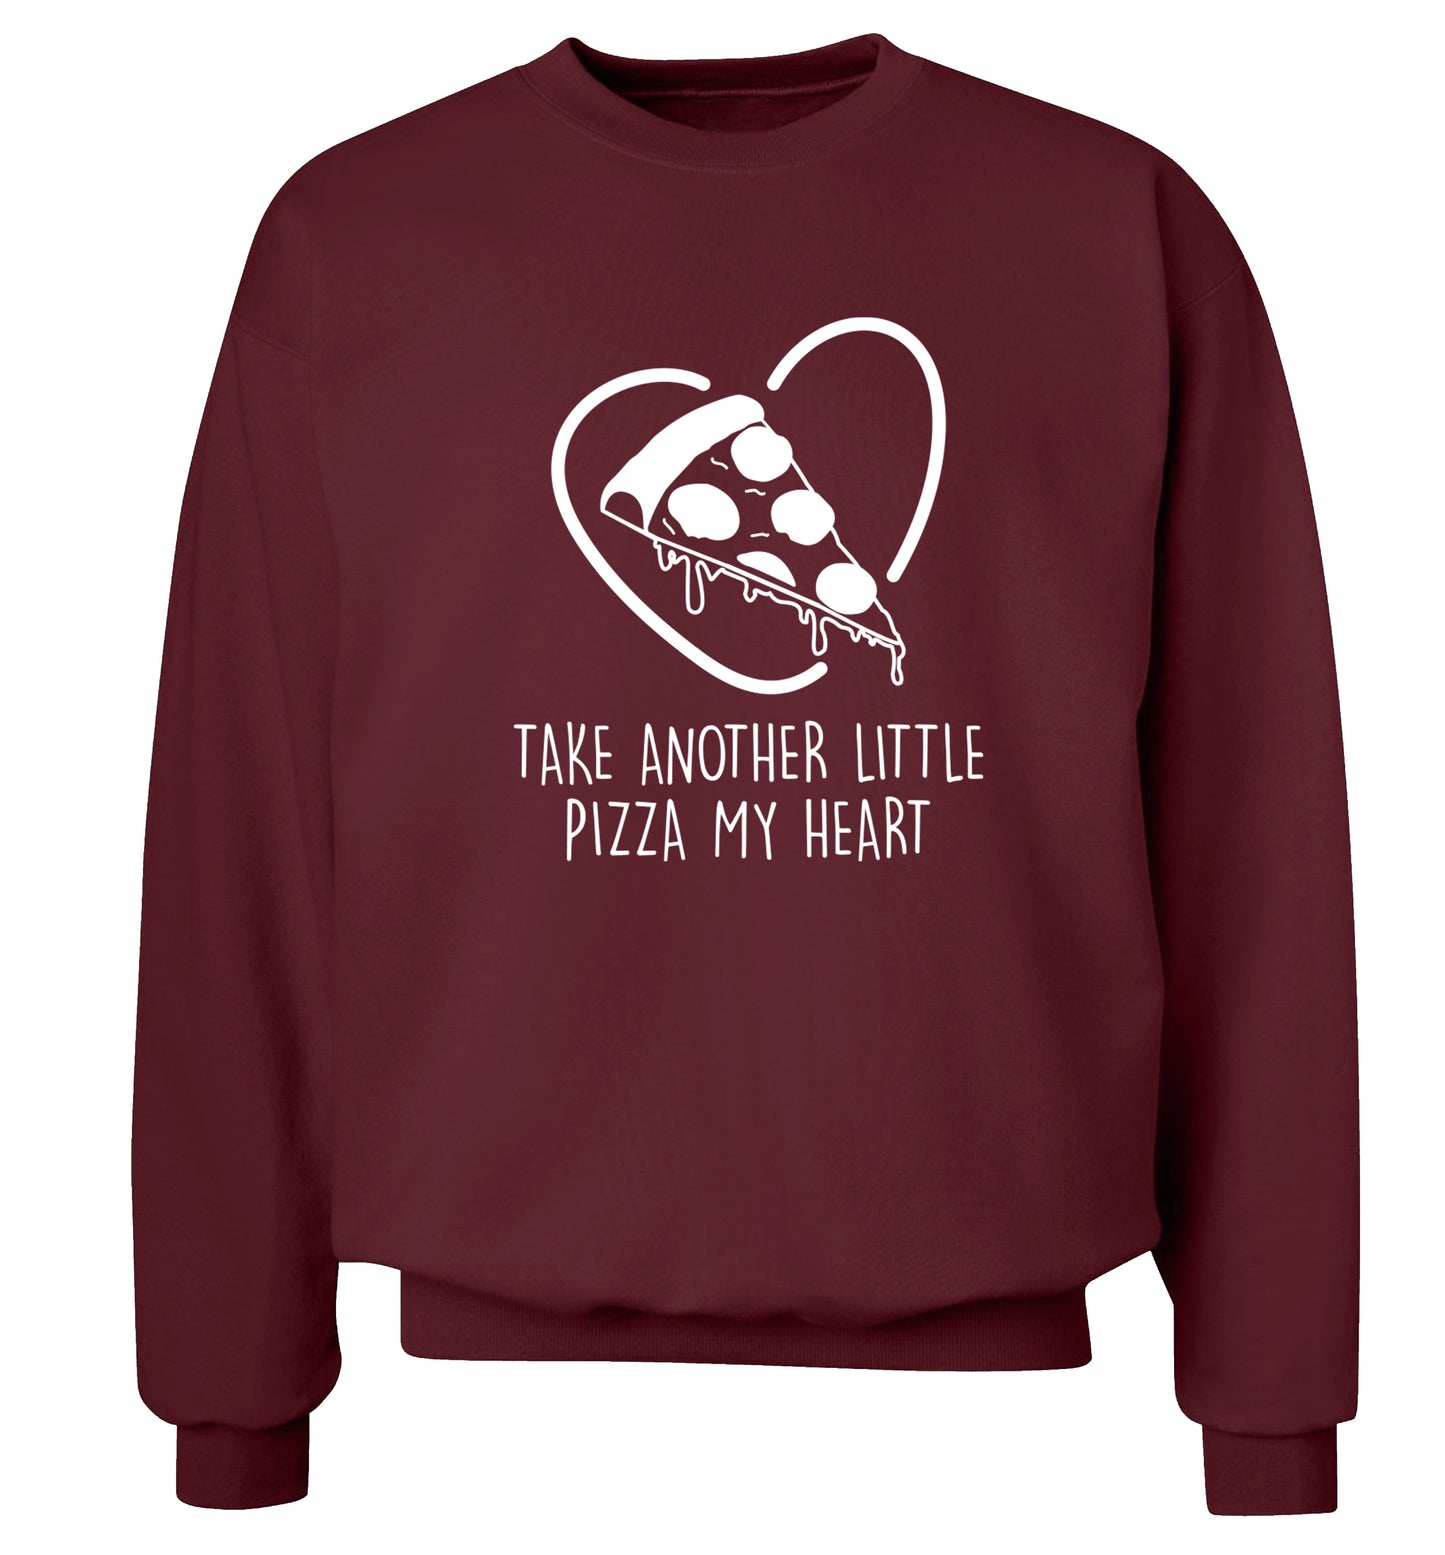 Take another little pizza my heart Adult's unisex maroon Sweater 2XL